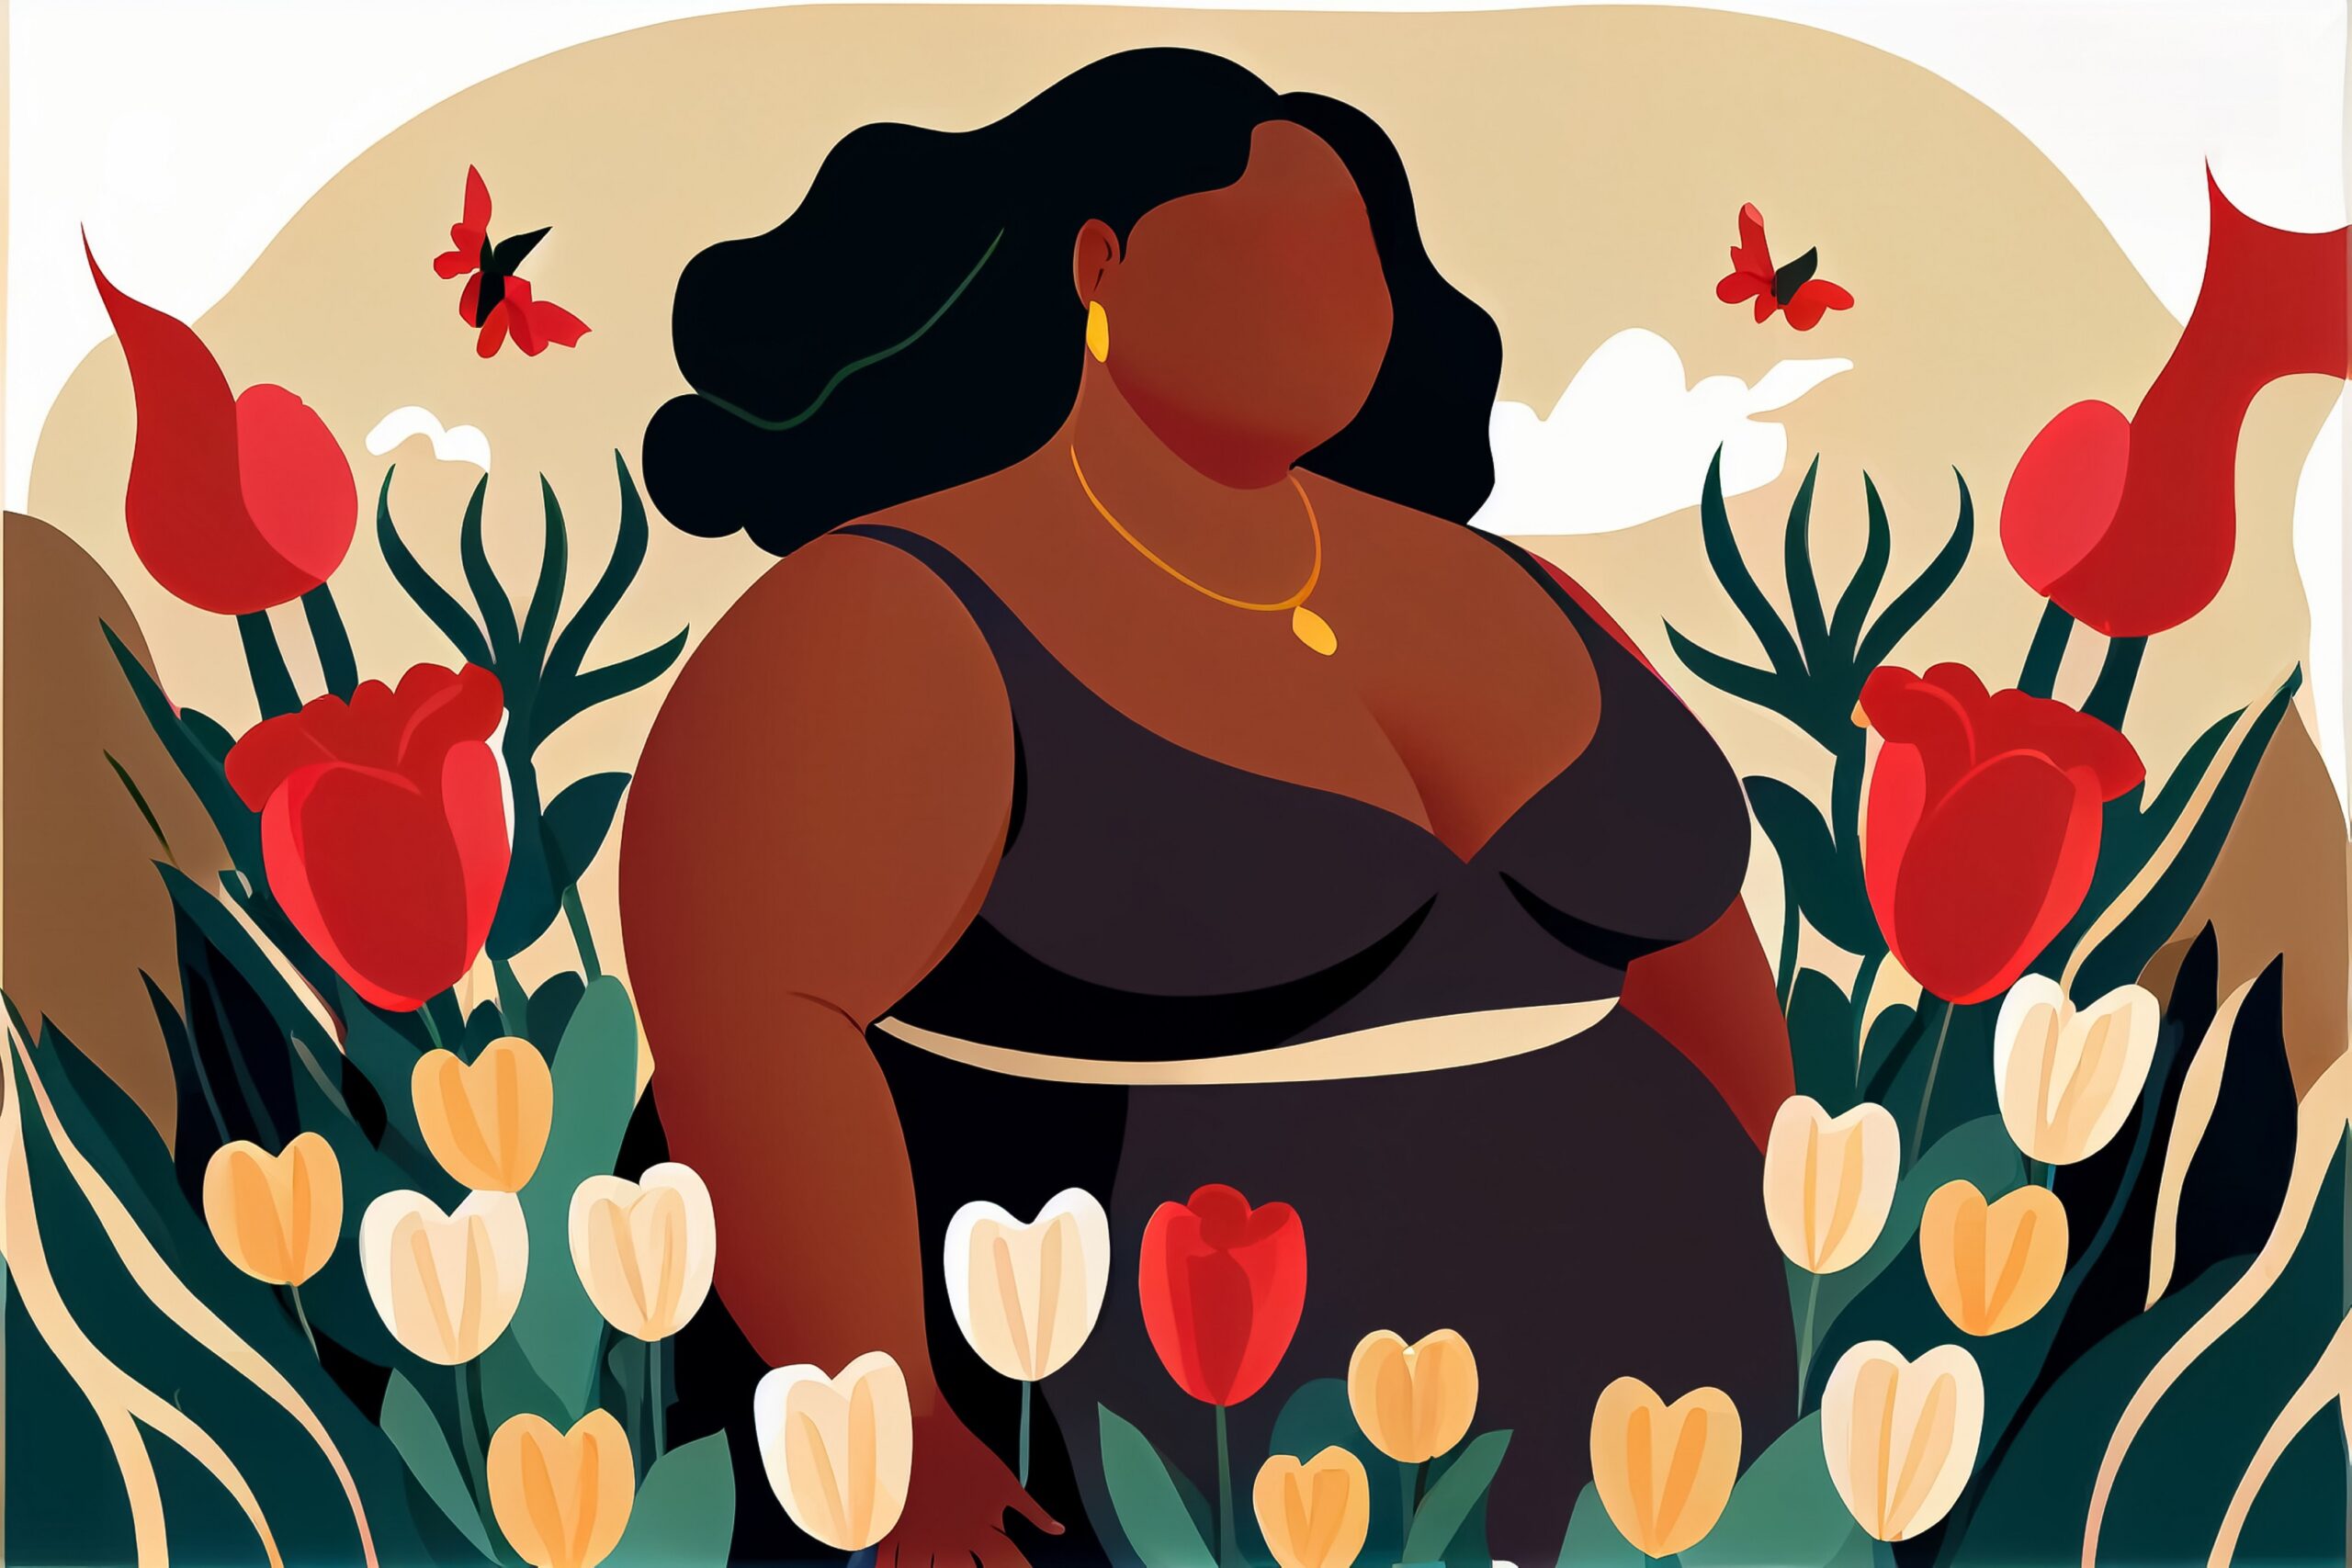 Reclaiming Your Power On Plus-Size Appreciation Day